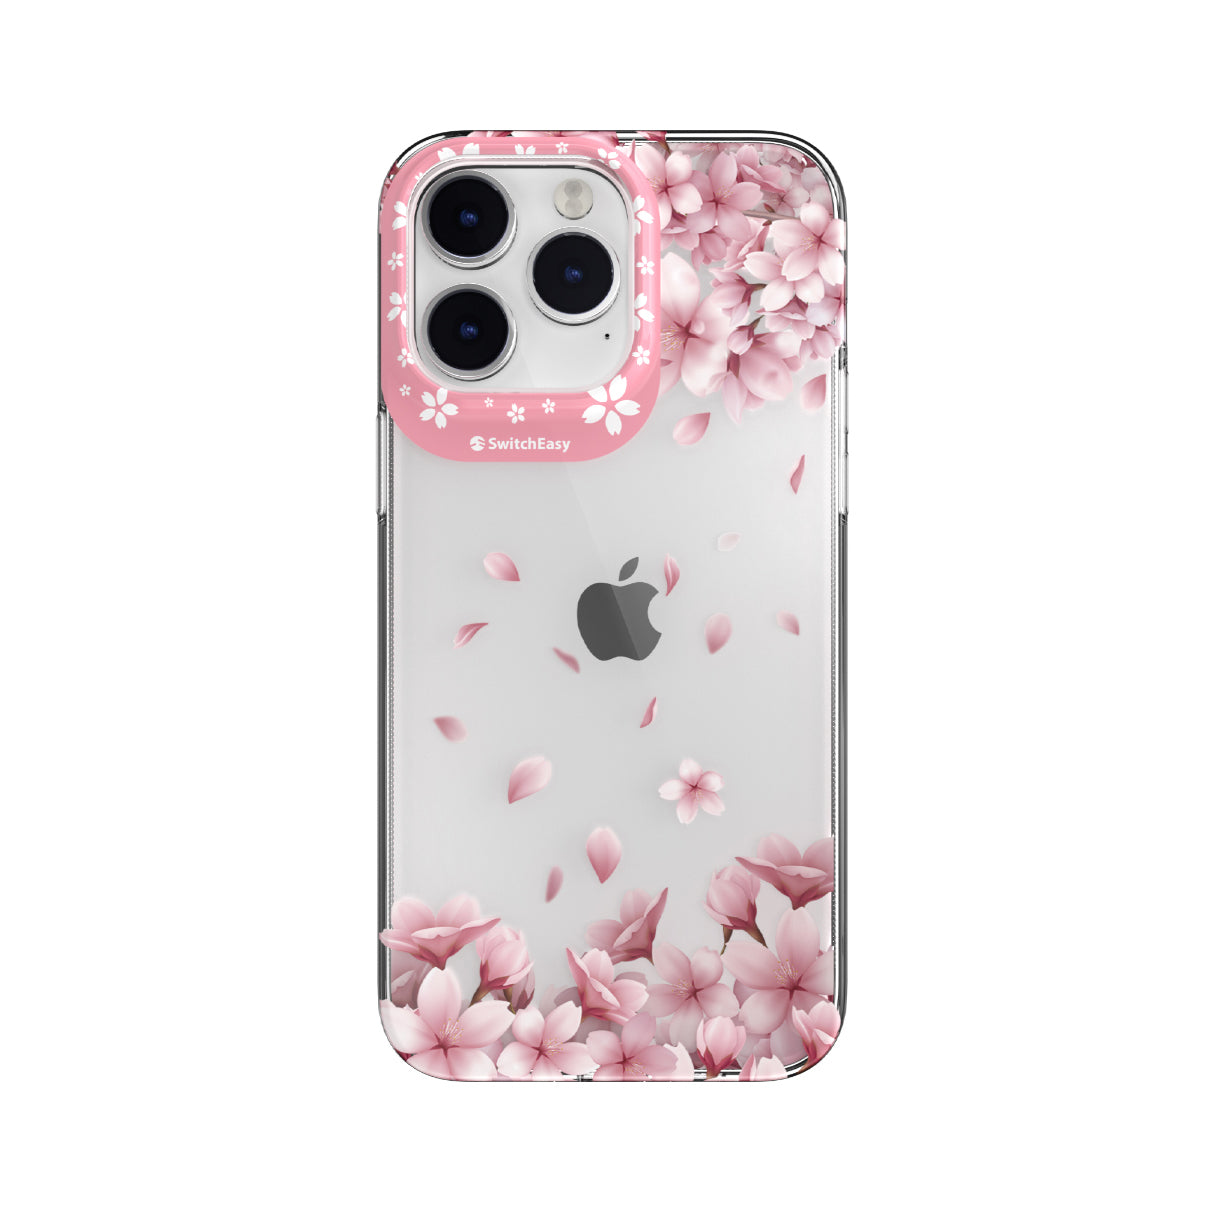 SwitchEasy Artist Case for iPhone 14 Series Mobile Phone Cases SwitchEasy Sakura iPhone 14 6.1 